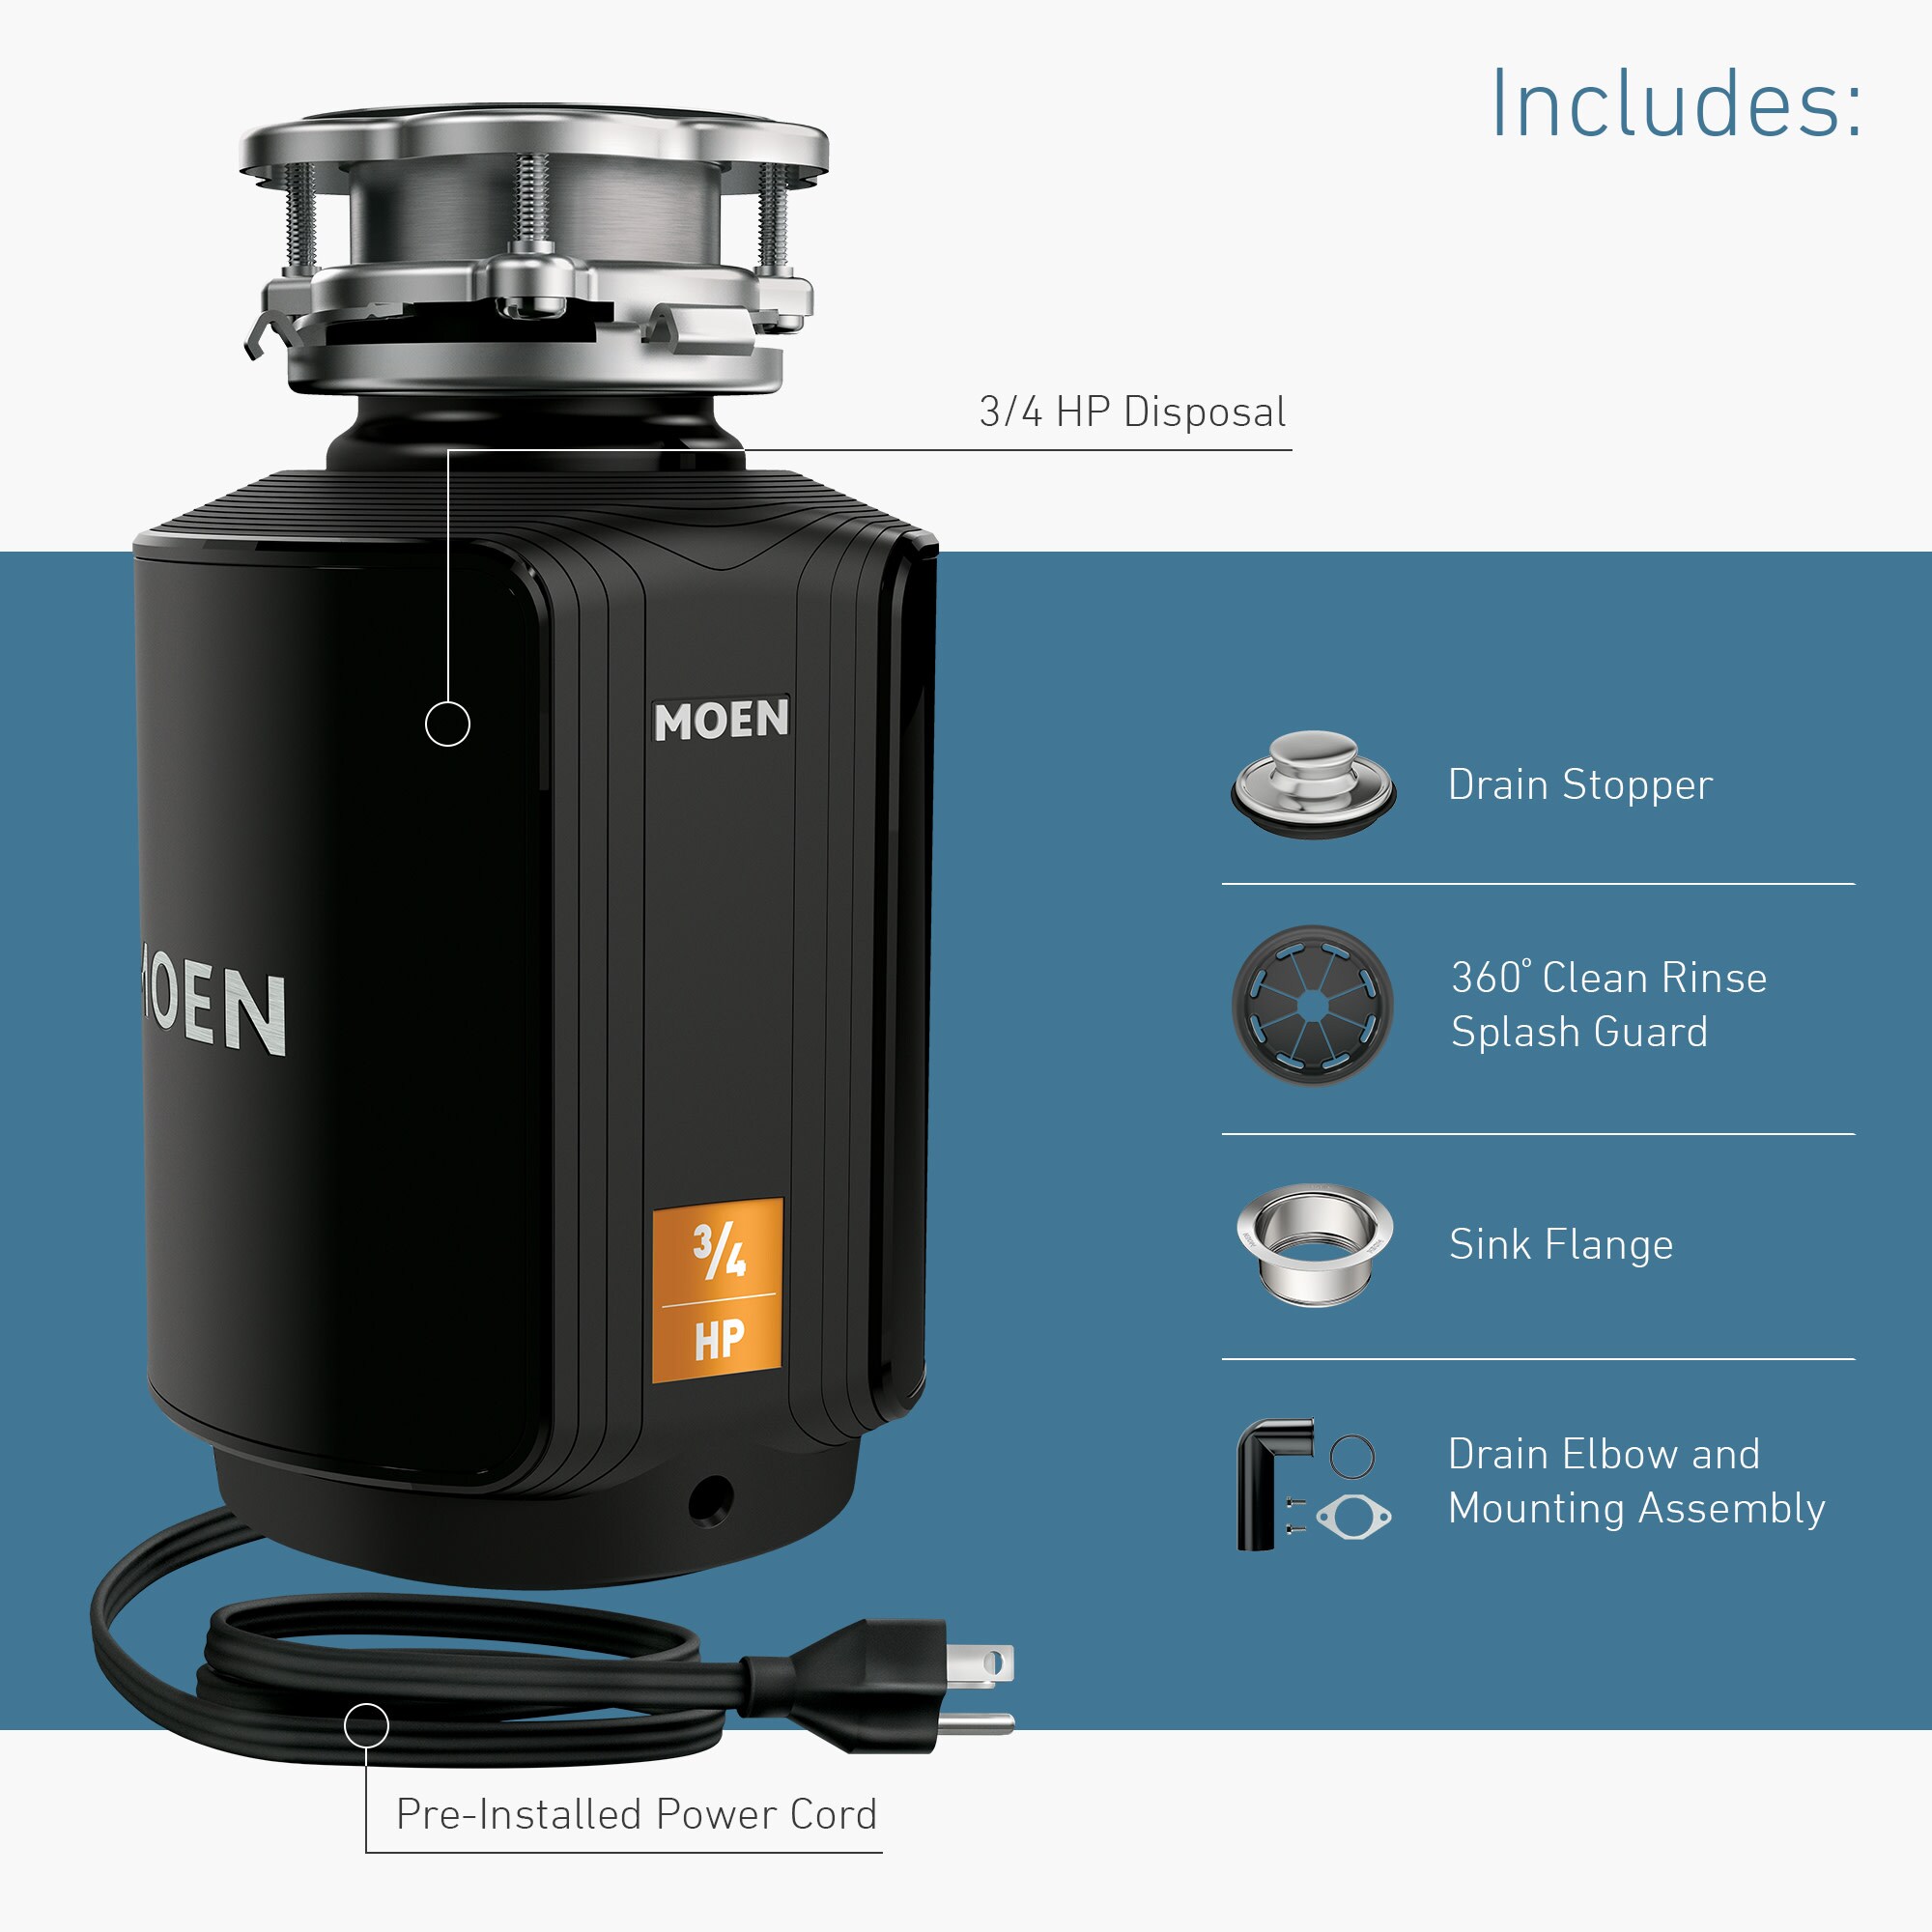 Moen Gx Corded 3/4-HP Continuous Feed Noise Insulation Garbage Disposal at 